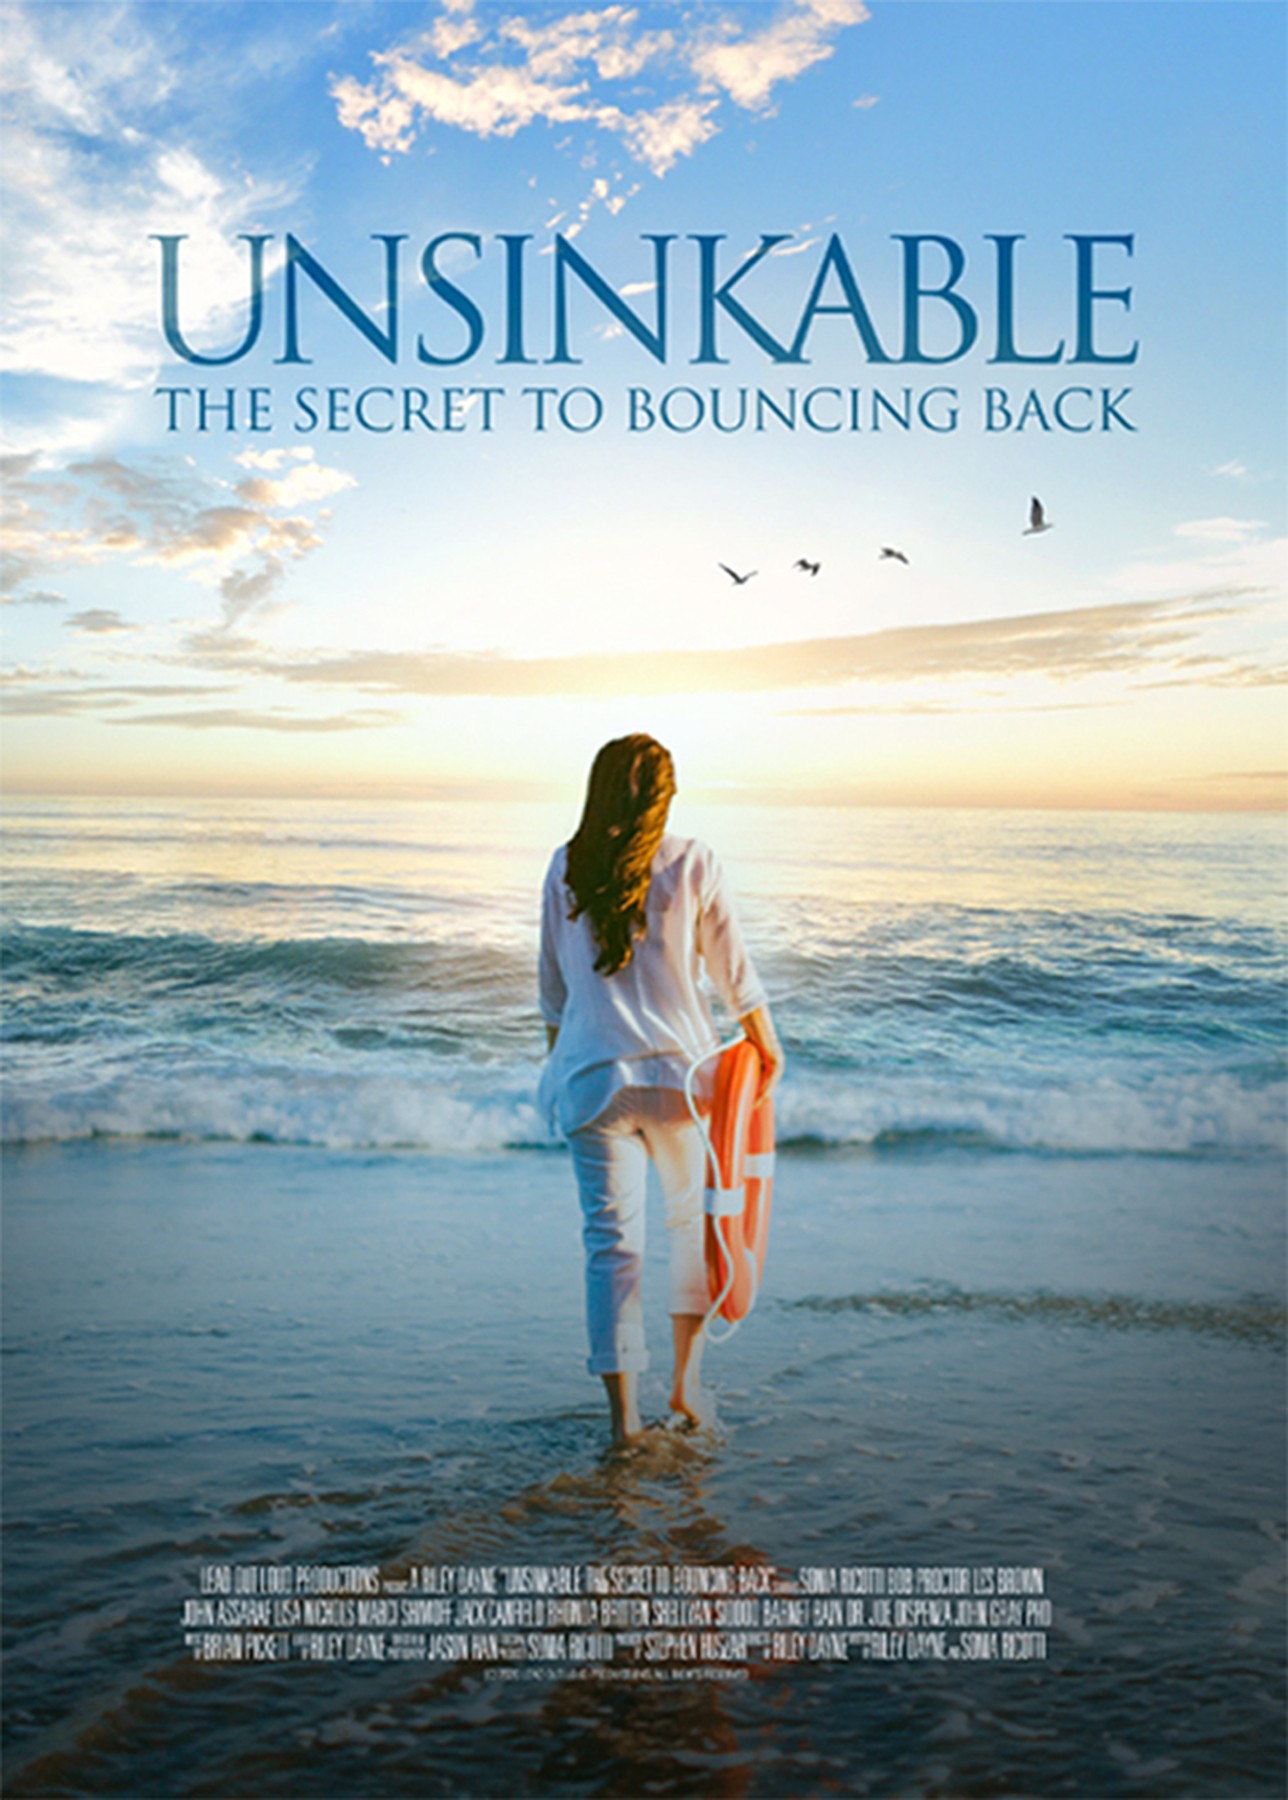 Unsinkable - The Secret To Bouncing Back movie poster